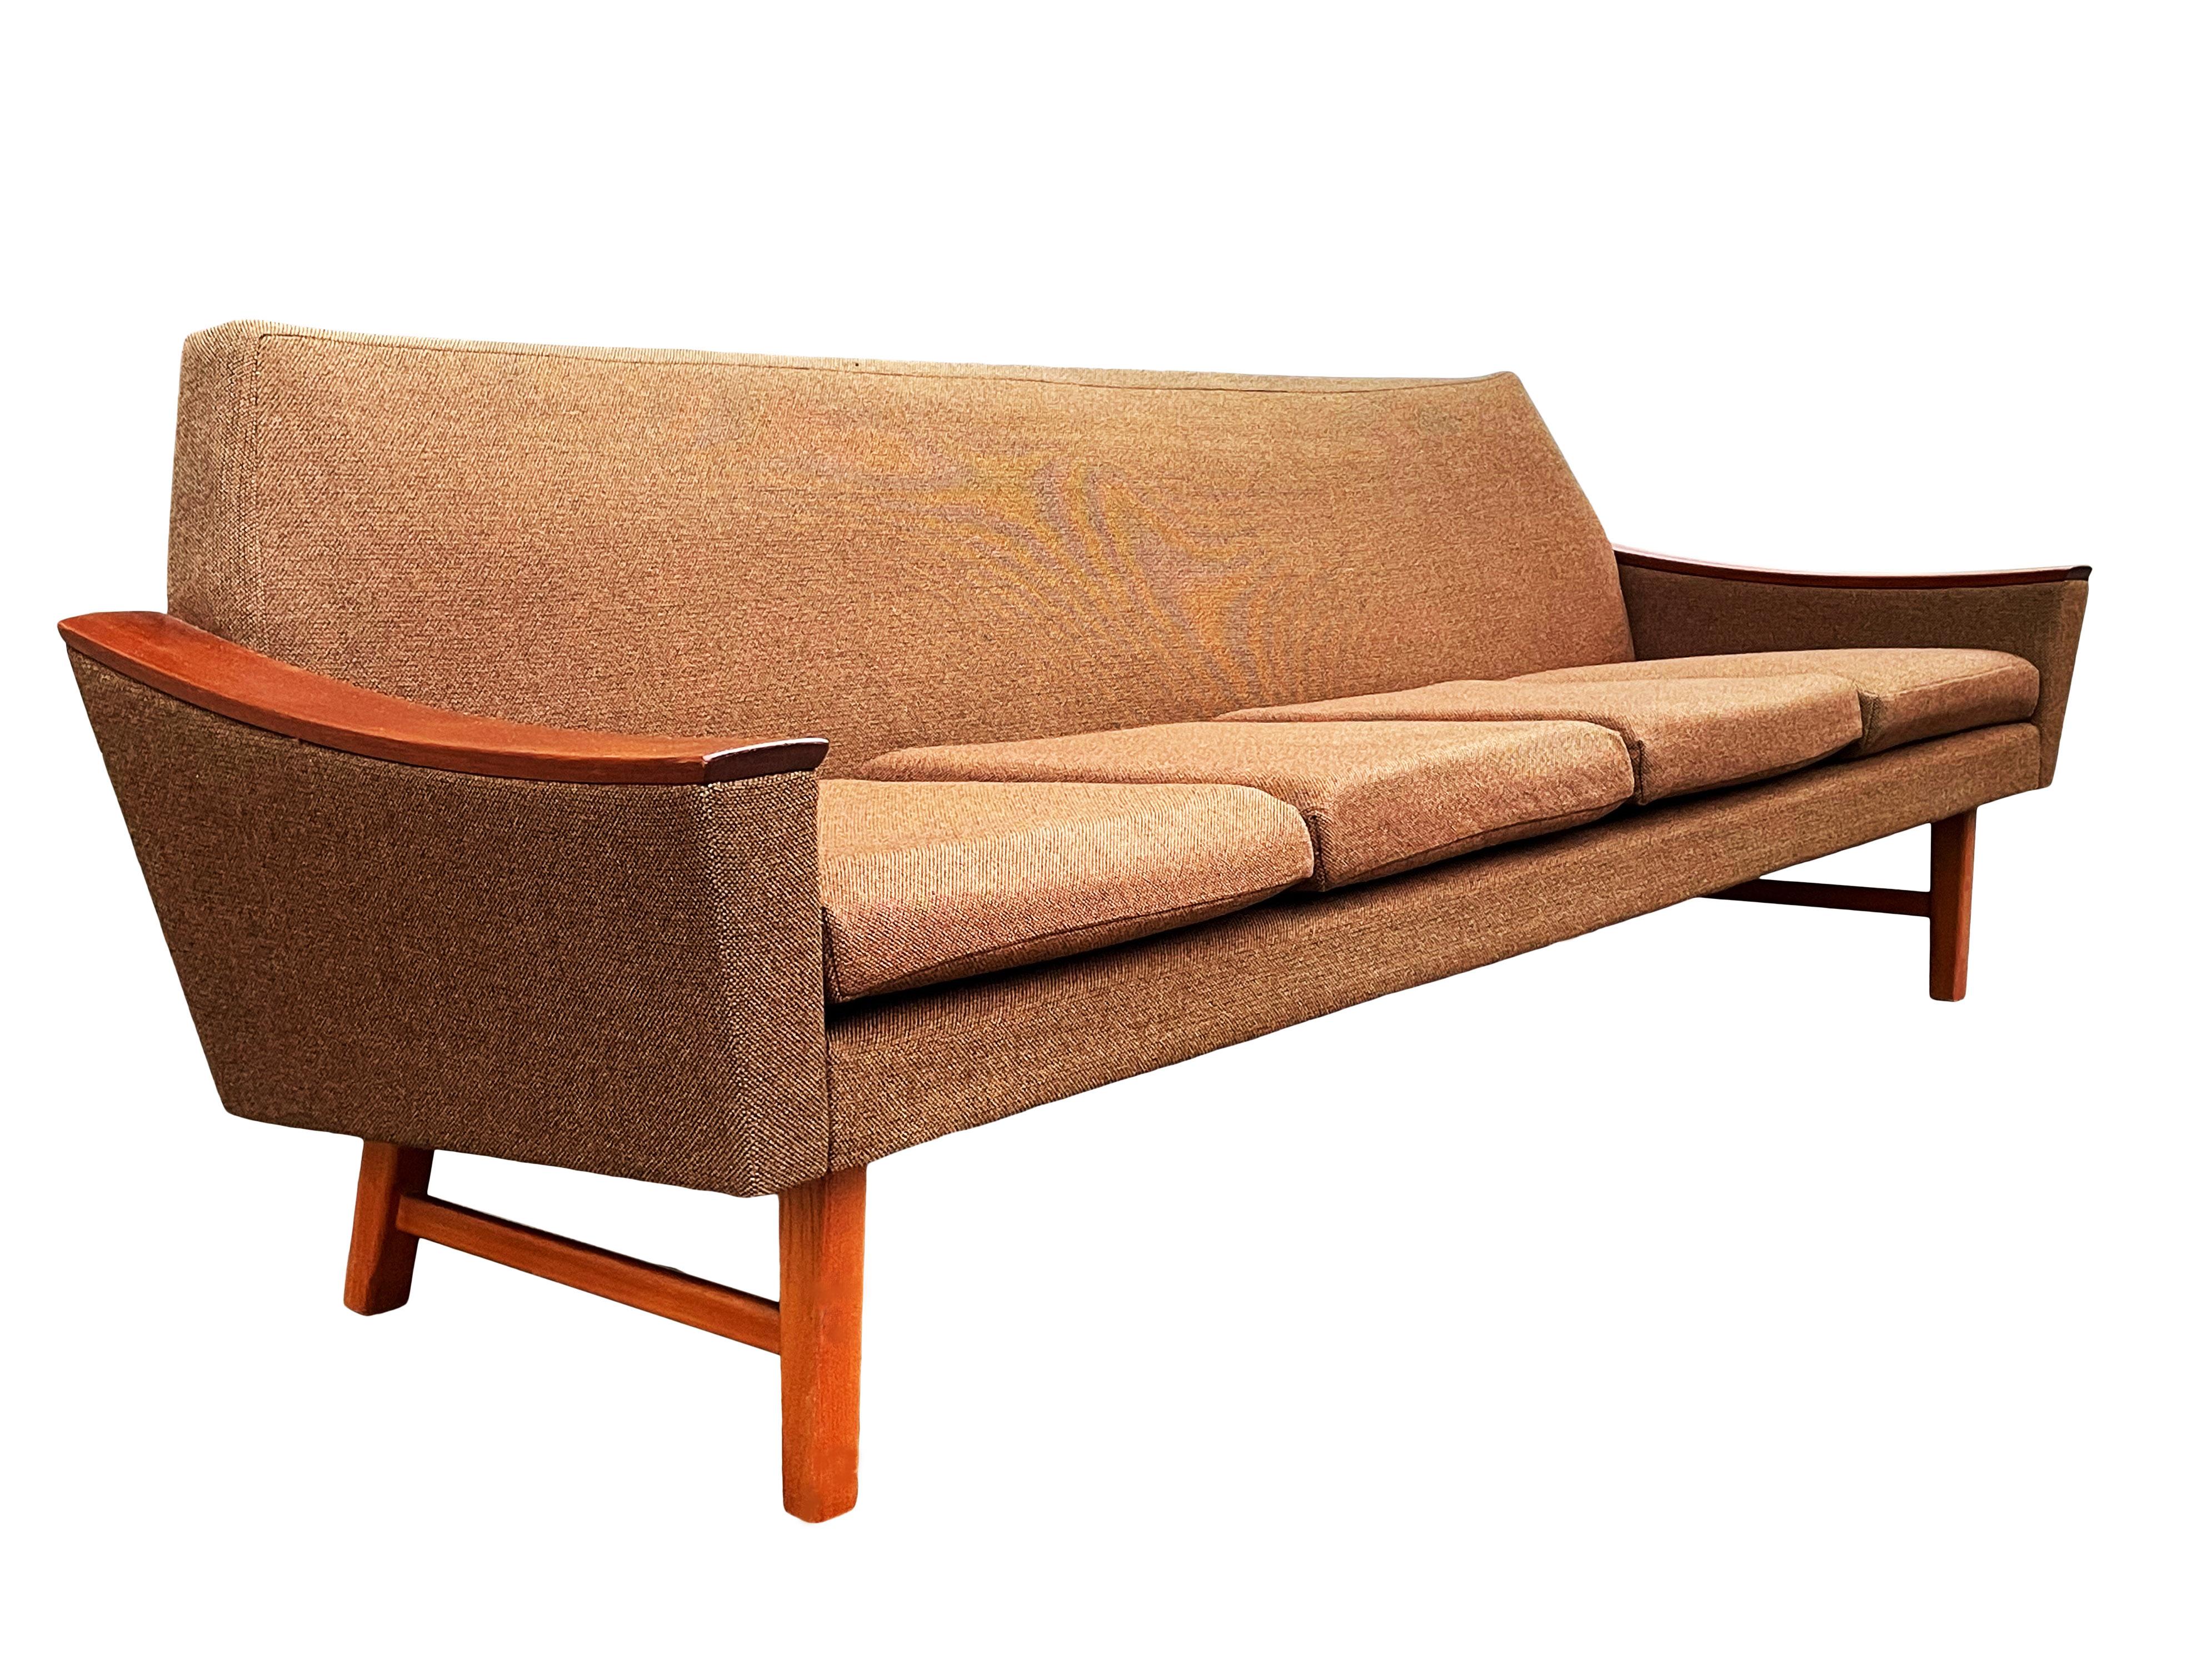 A sleek modern sofa designed by Oscar Langlo and produced in Norway, circa 1960. This sofa is all original with teak wood details and original brown tweed upholstery. Manufacturer label. In original and ready to use condition.